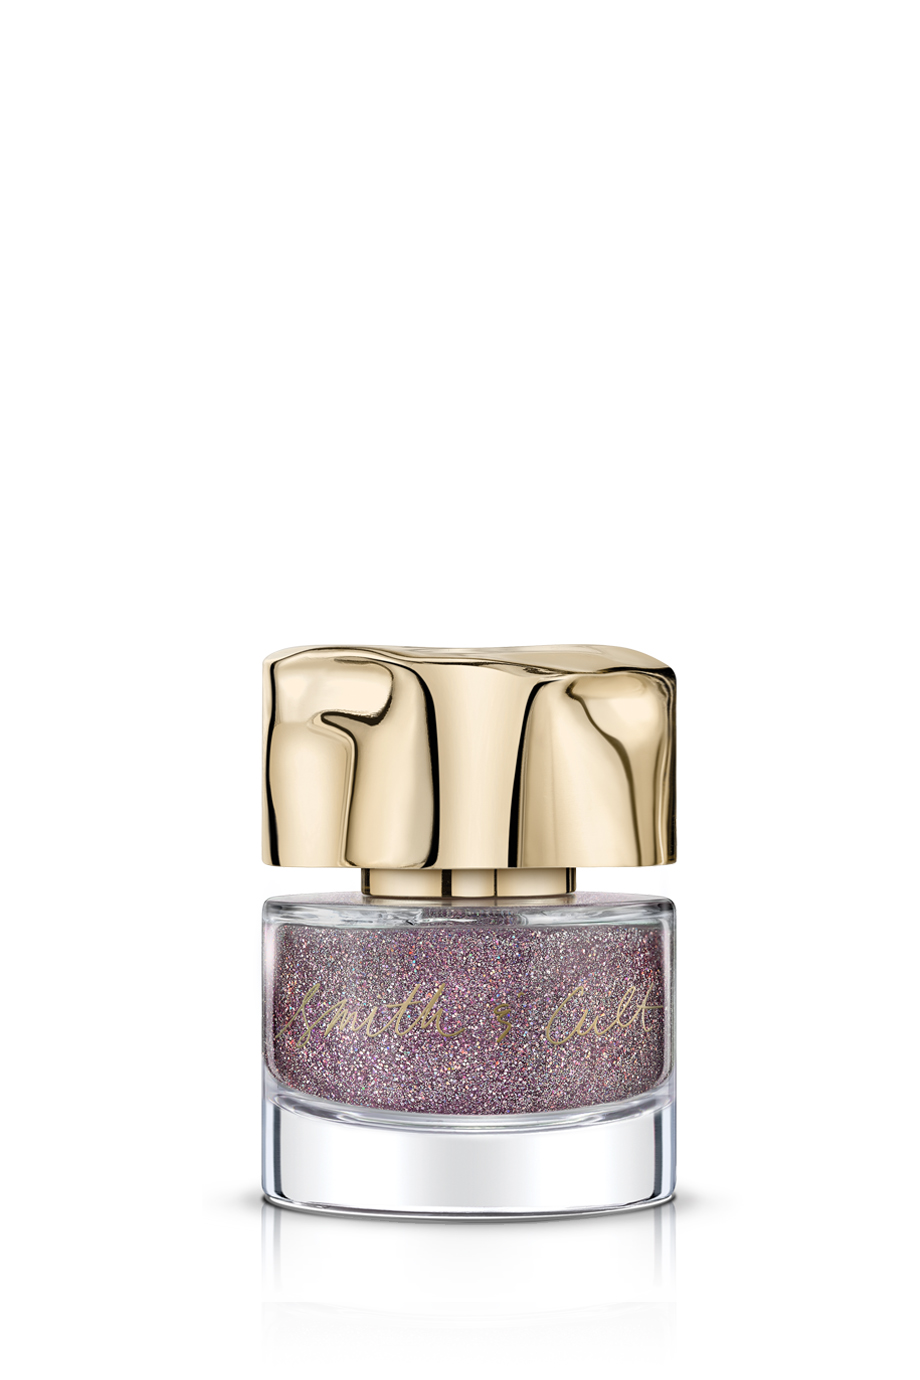 Smith & Cult Take Fountain Nail Lacquer